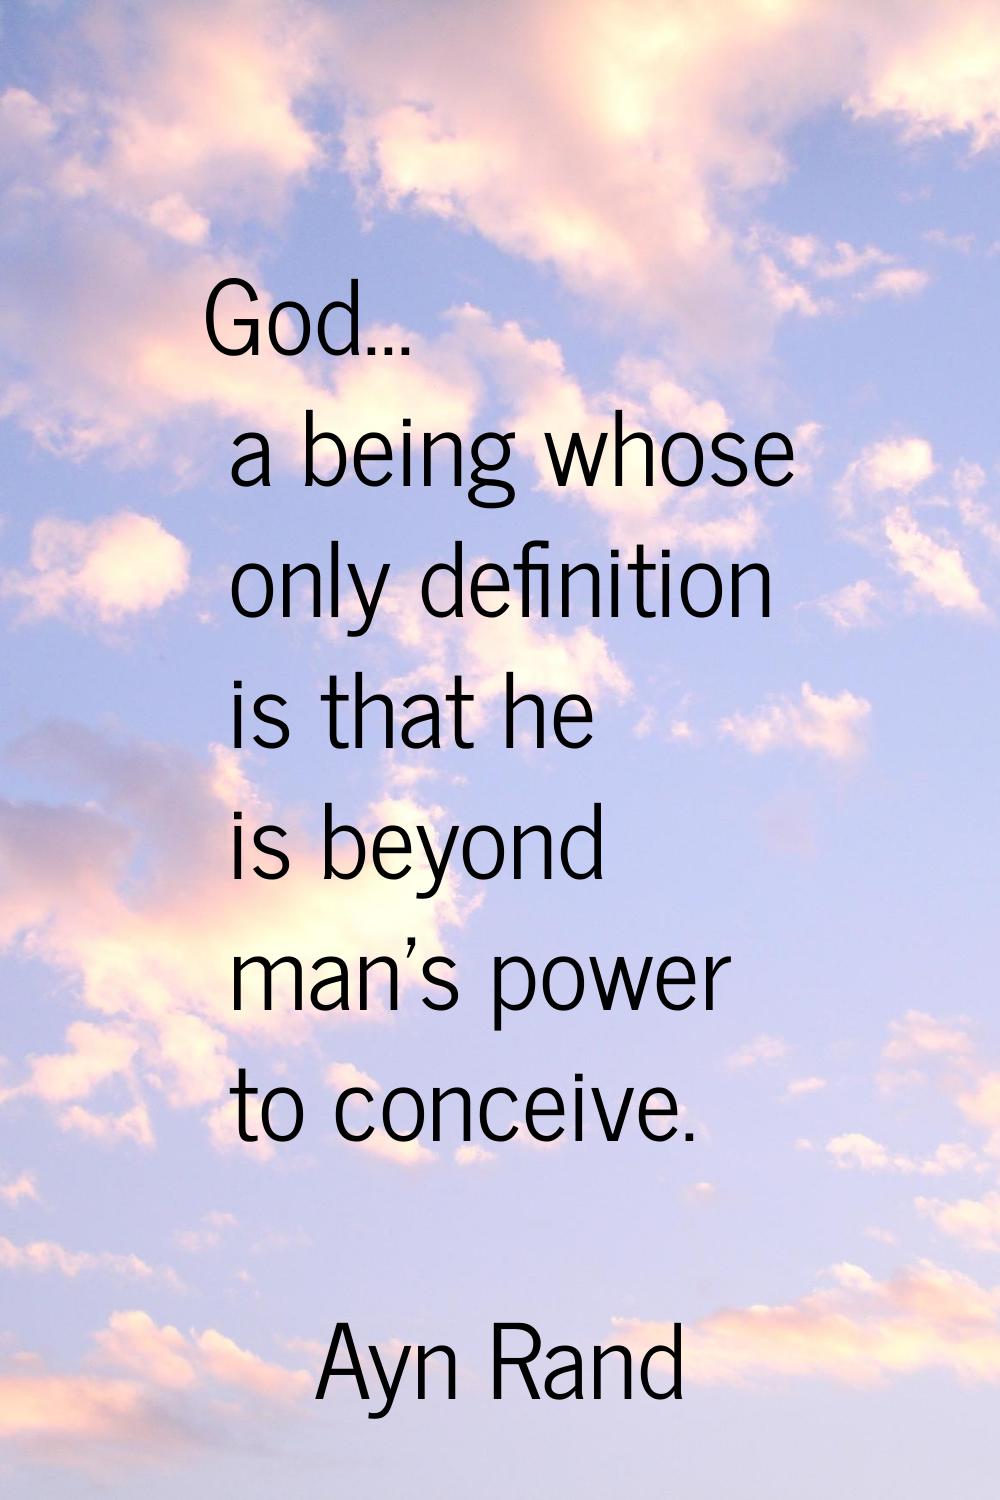 God... a being whose only definition is that he is beyond man's power to conceive.